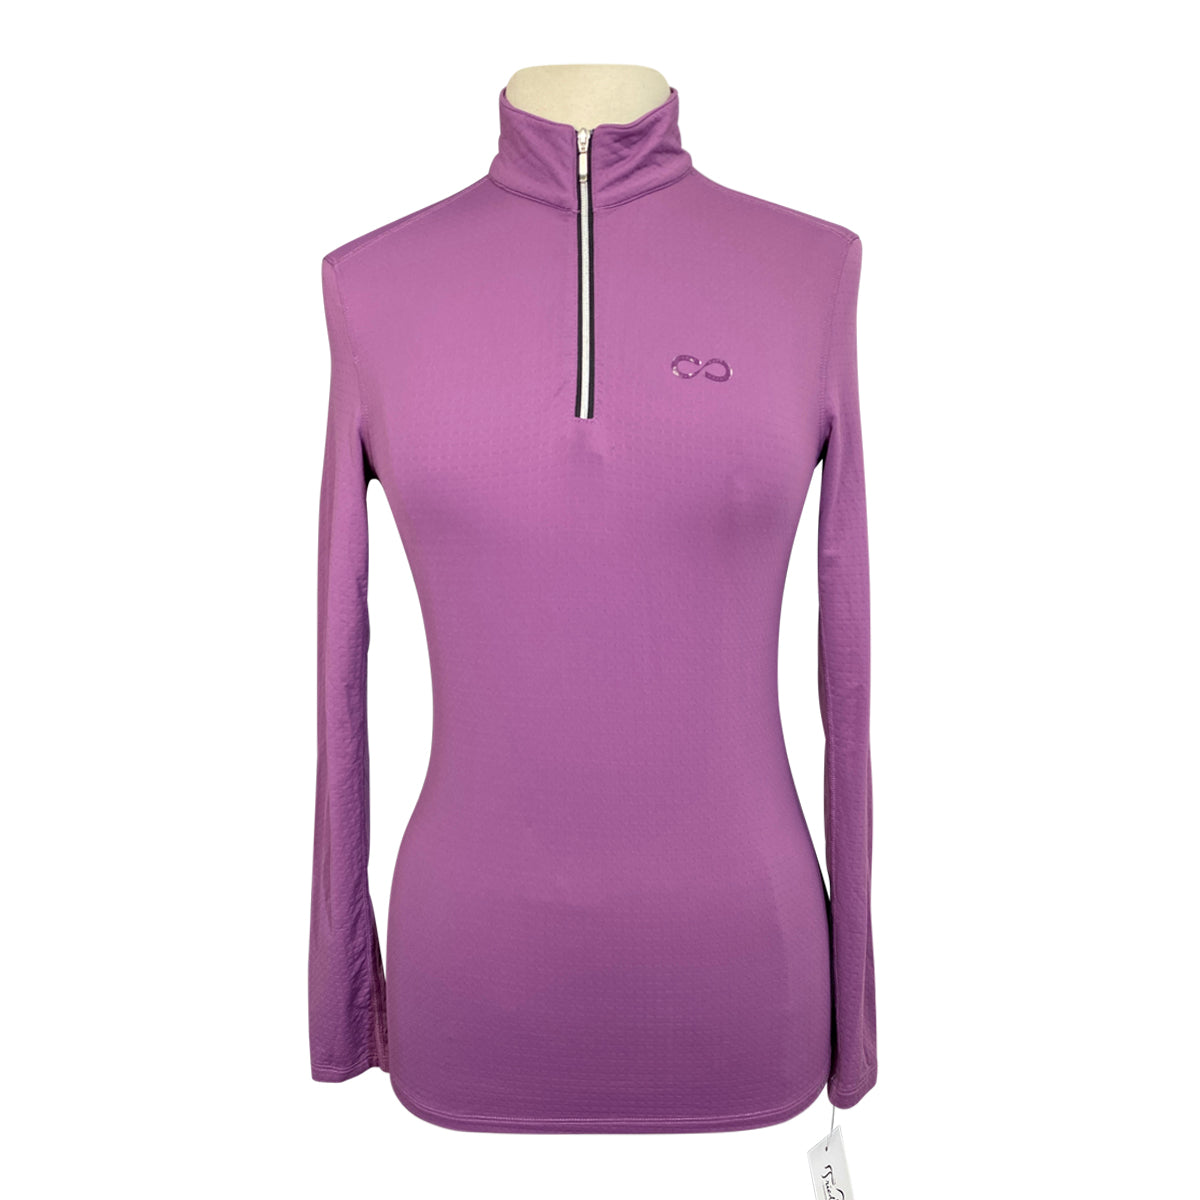 Dover Saddlery Long Sleeve Sunshirt in Lilac